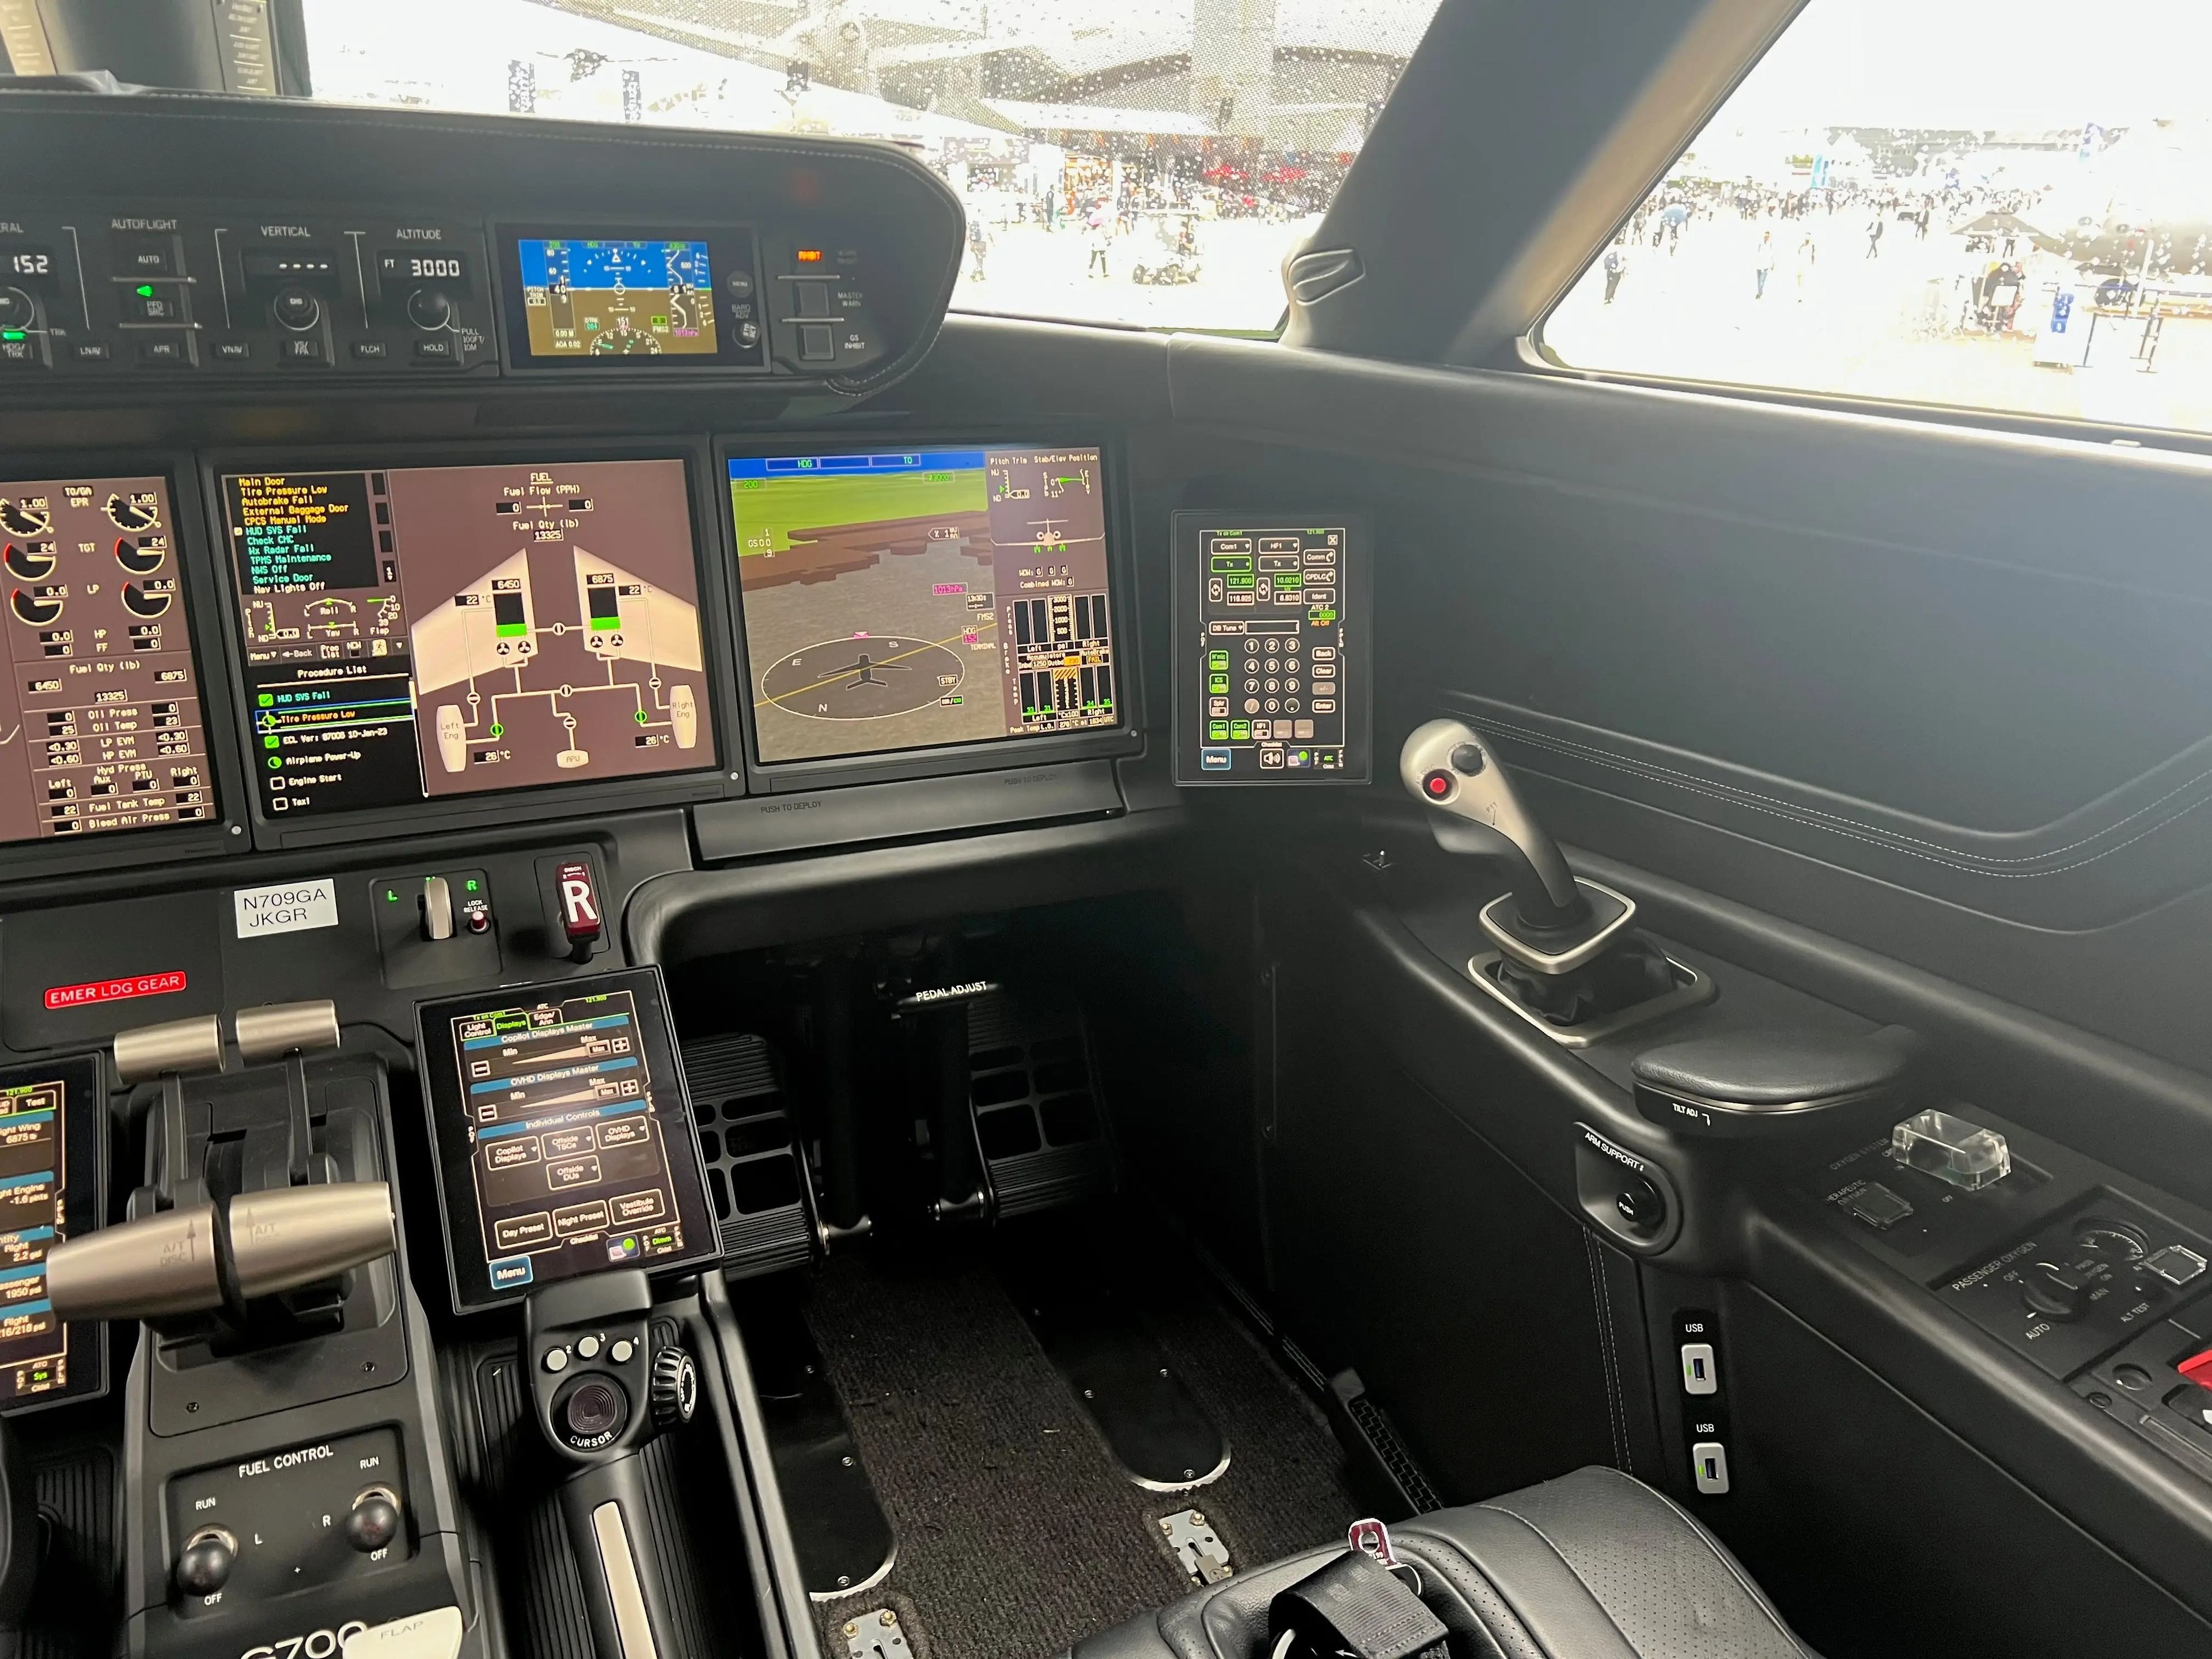 The cockpit of the G700.